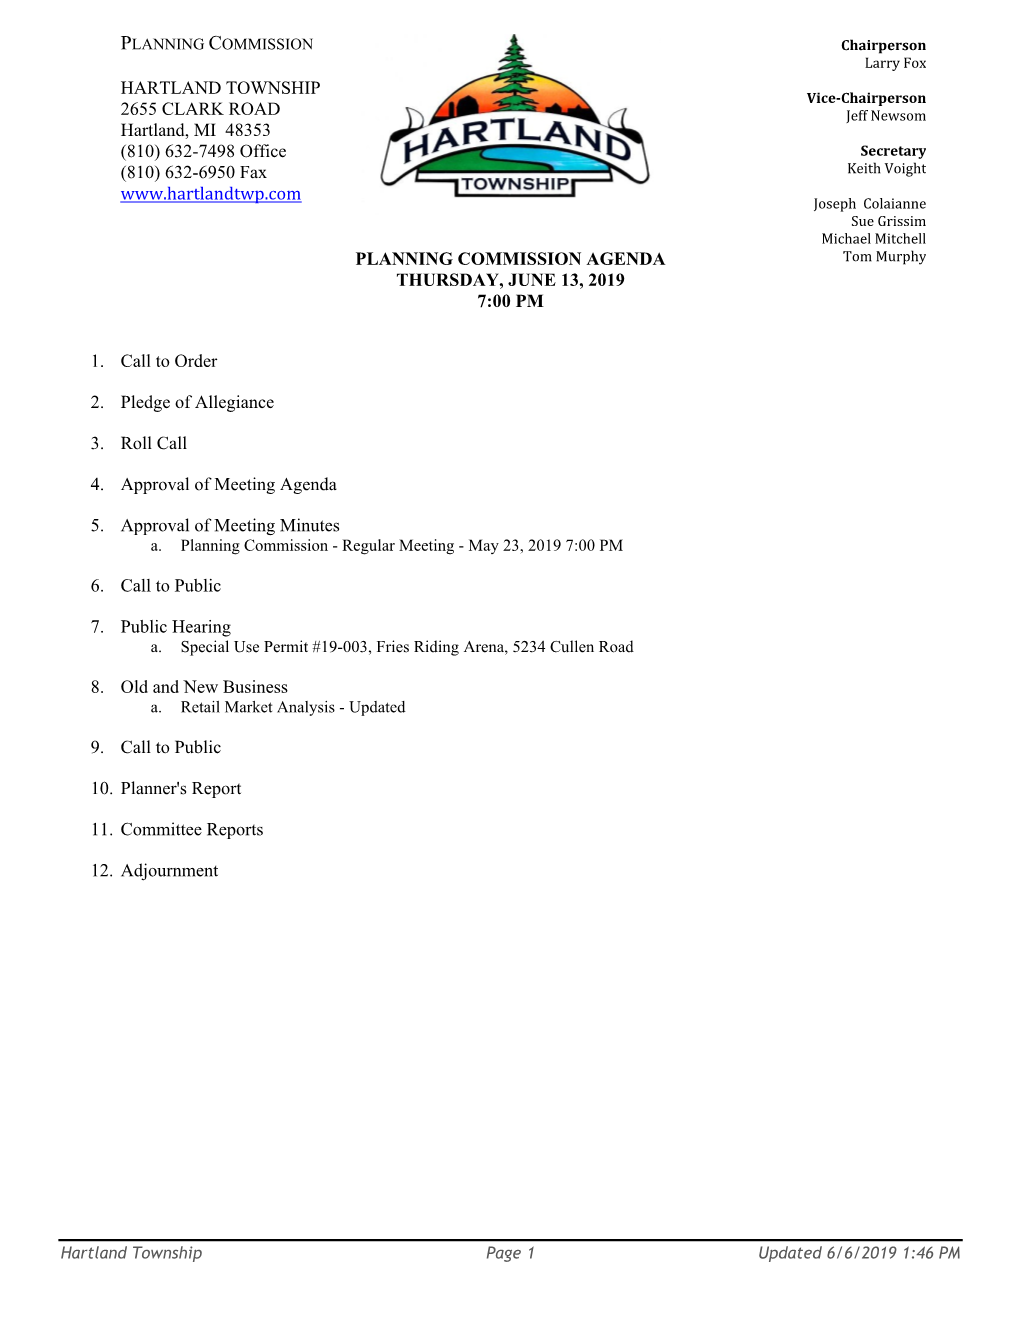 6/13/19 Planning Commission Packet